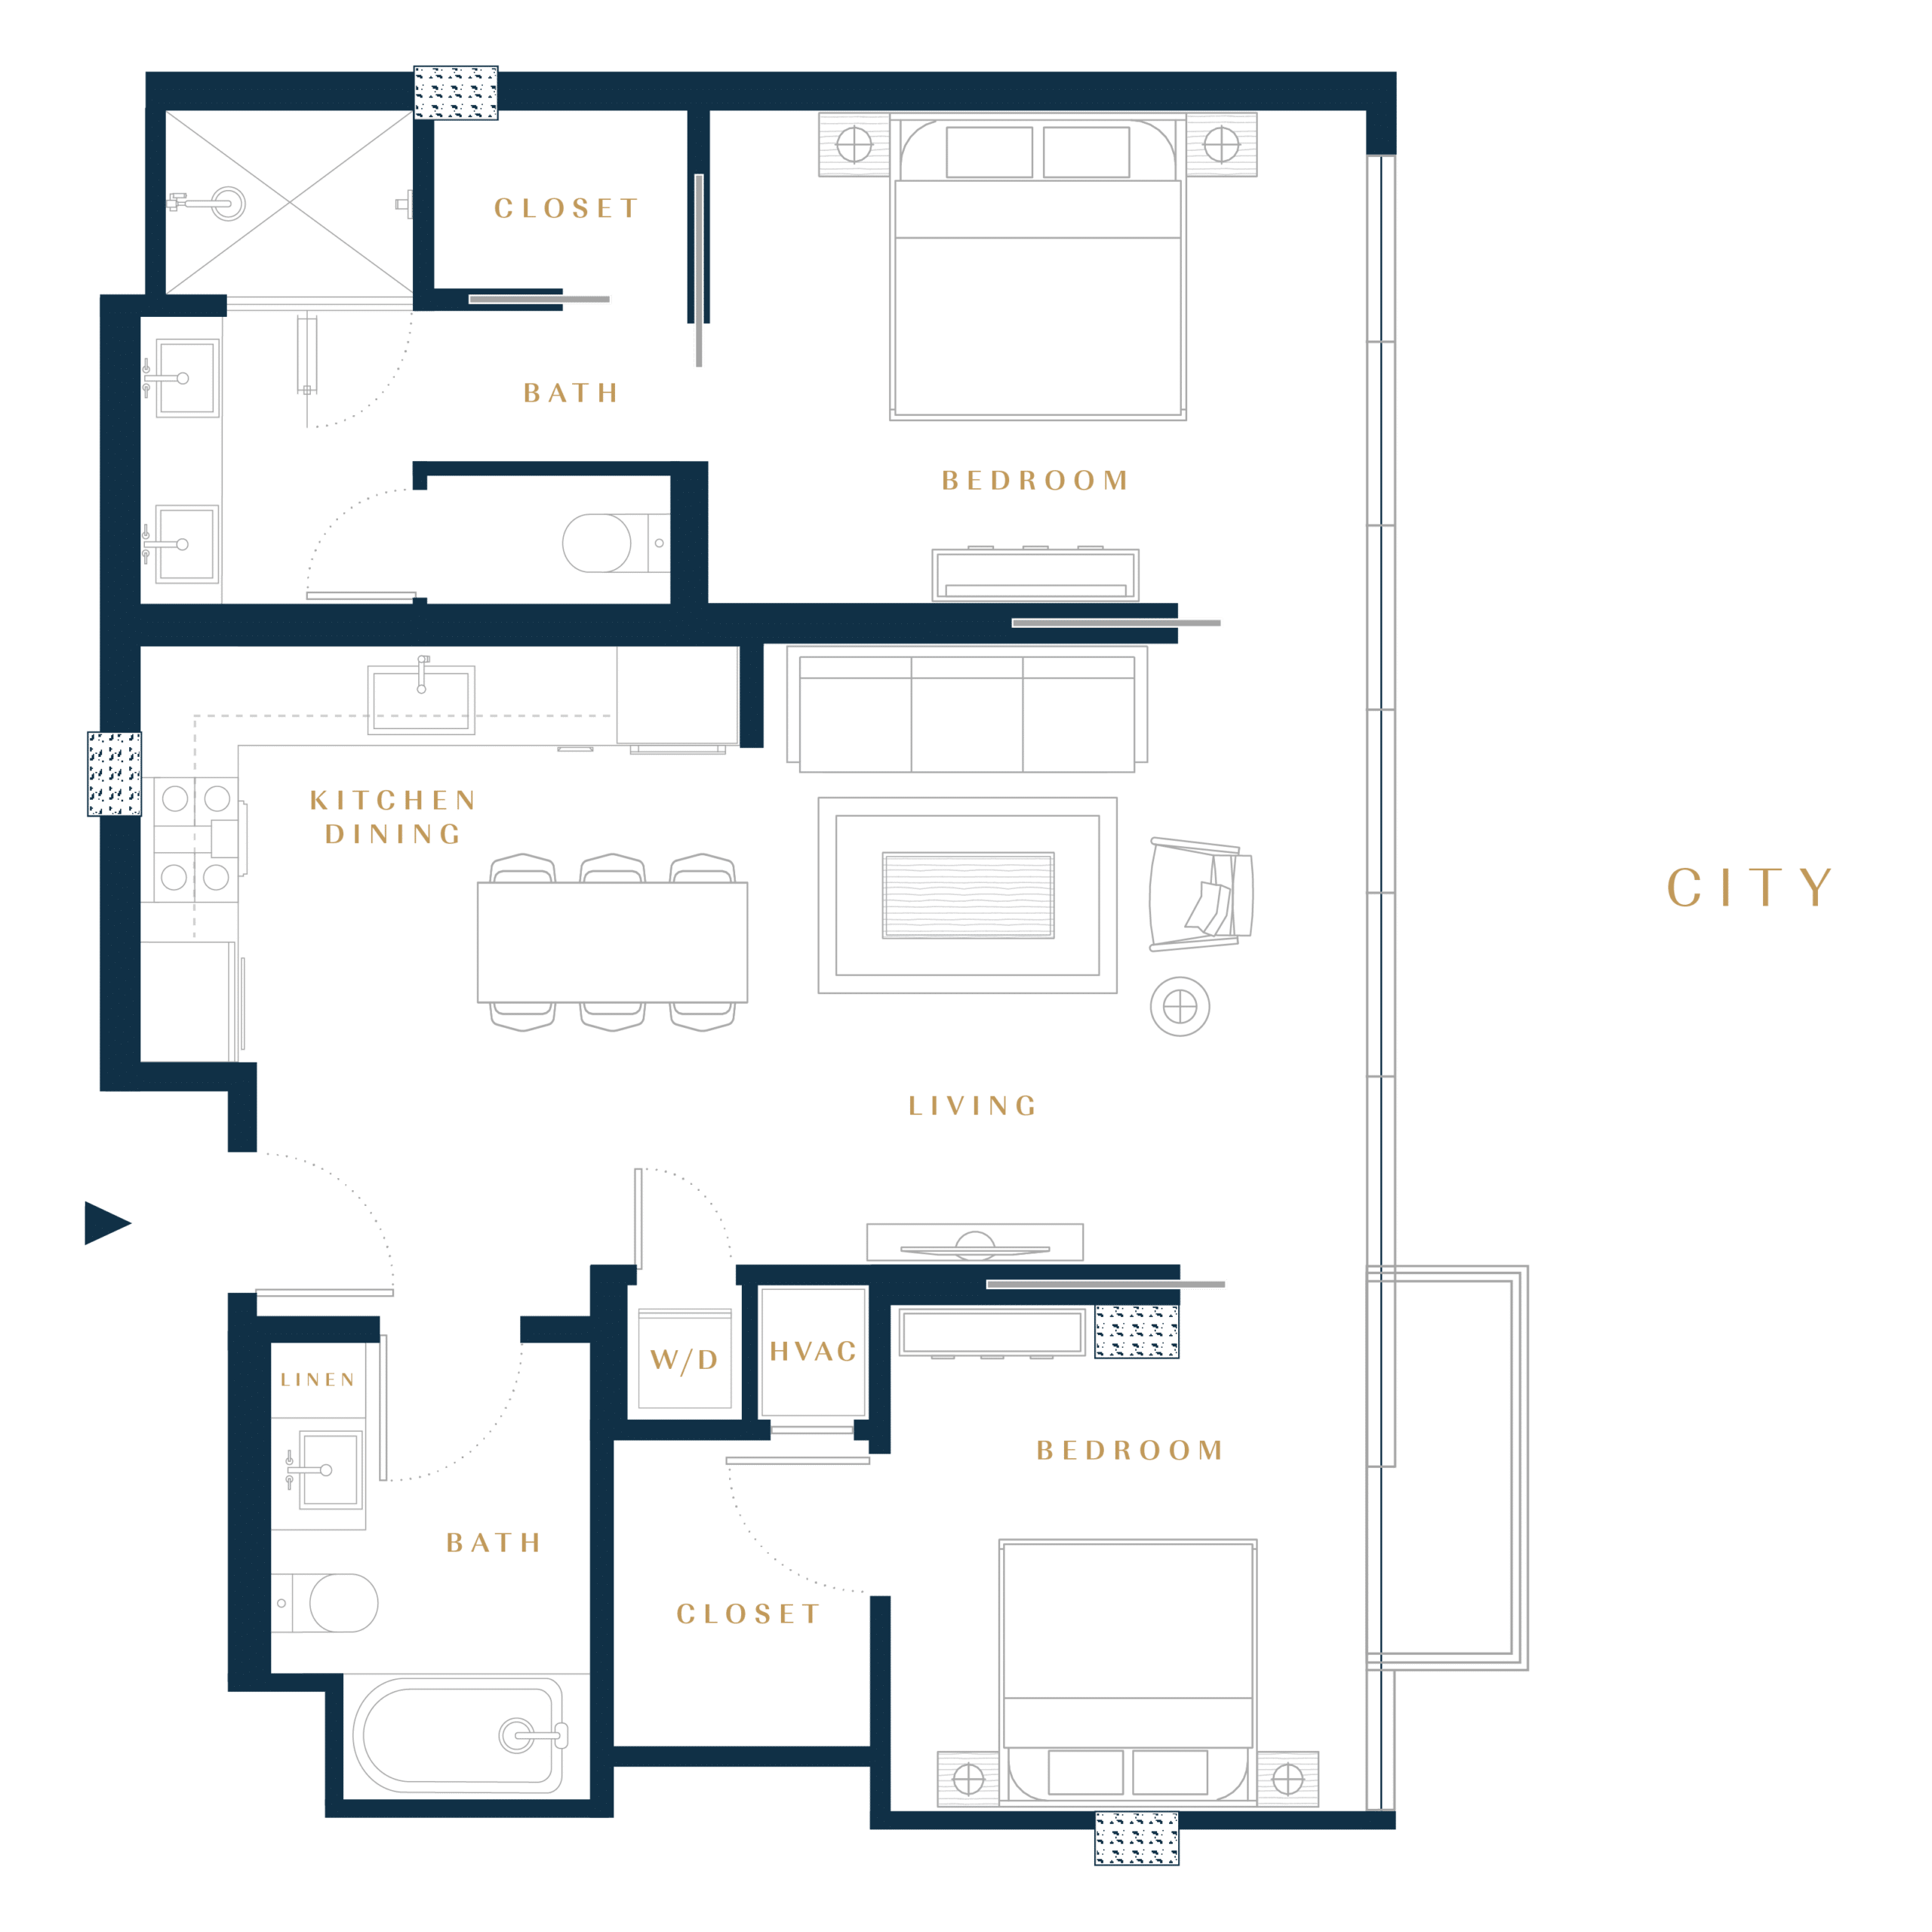 Residence 2I luxury condo floor plan in San Francisco Dogpatch